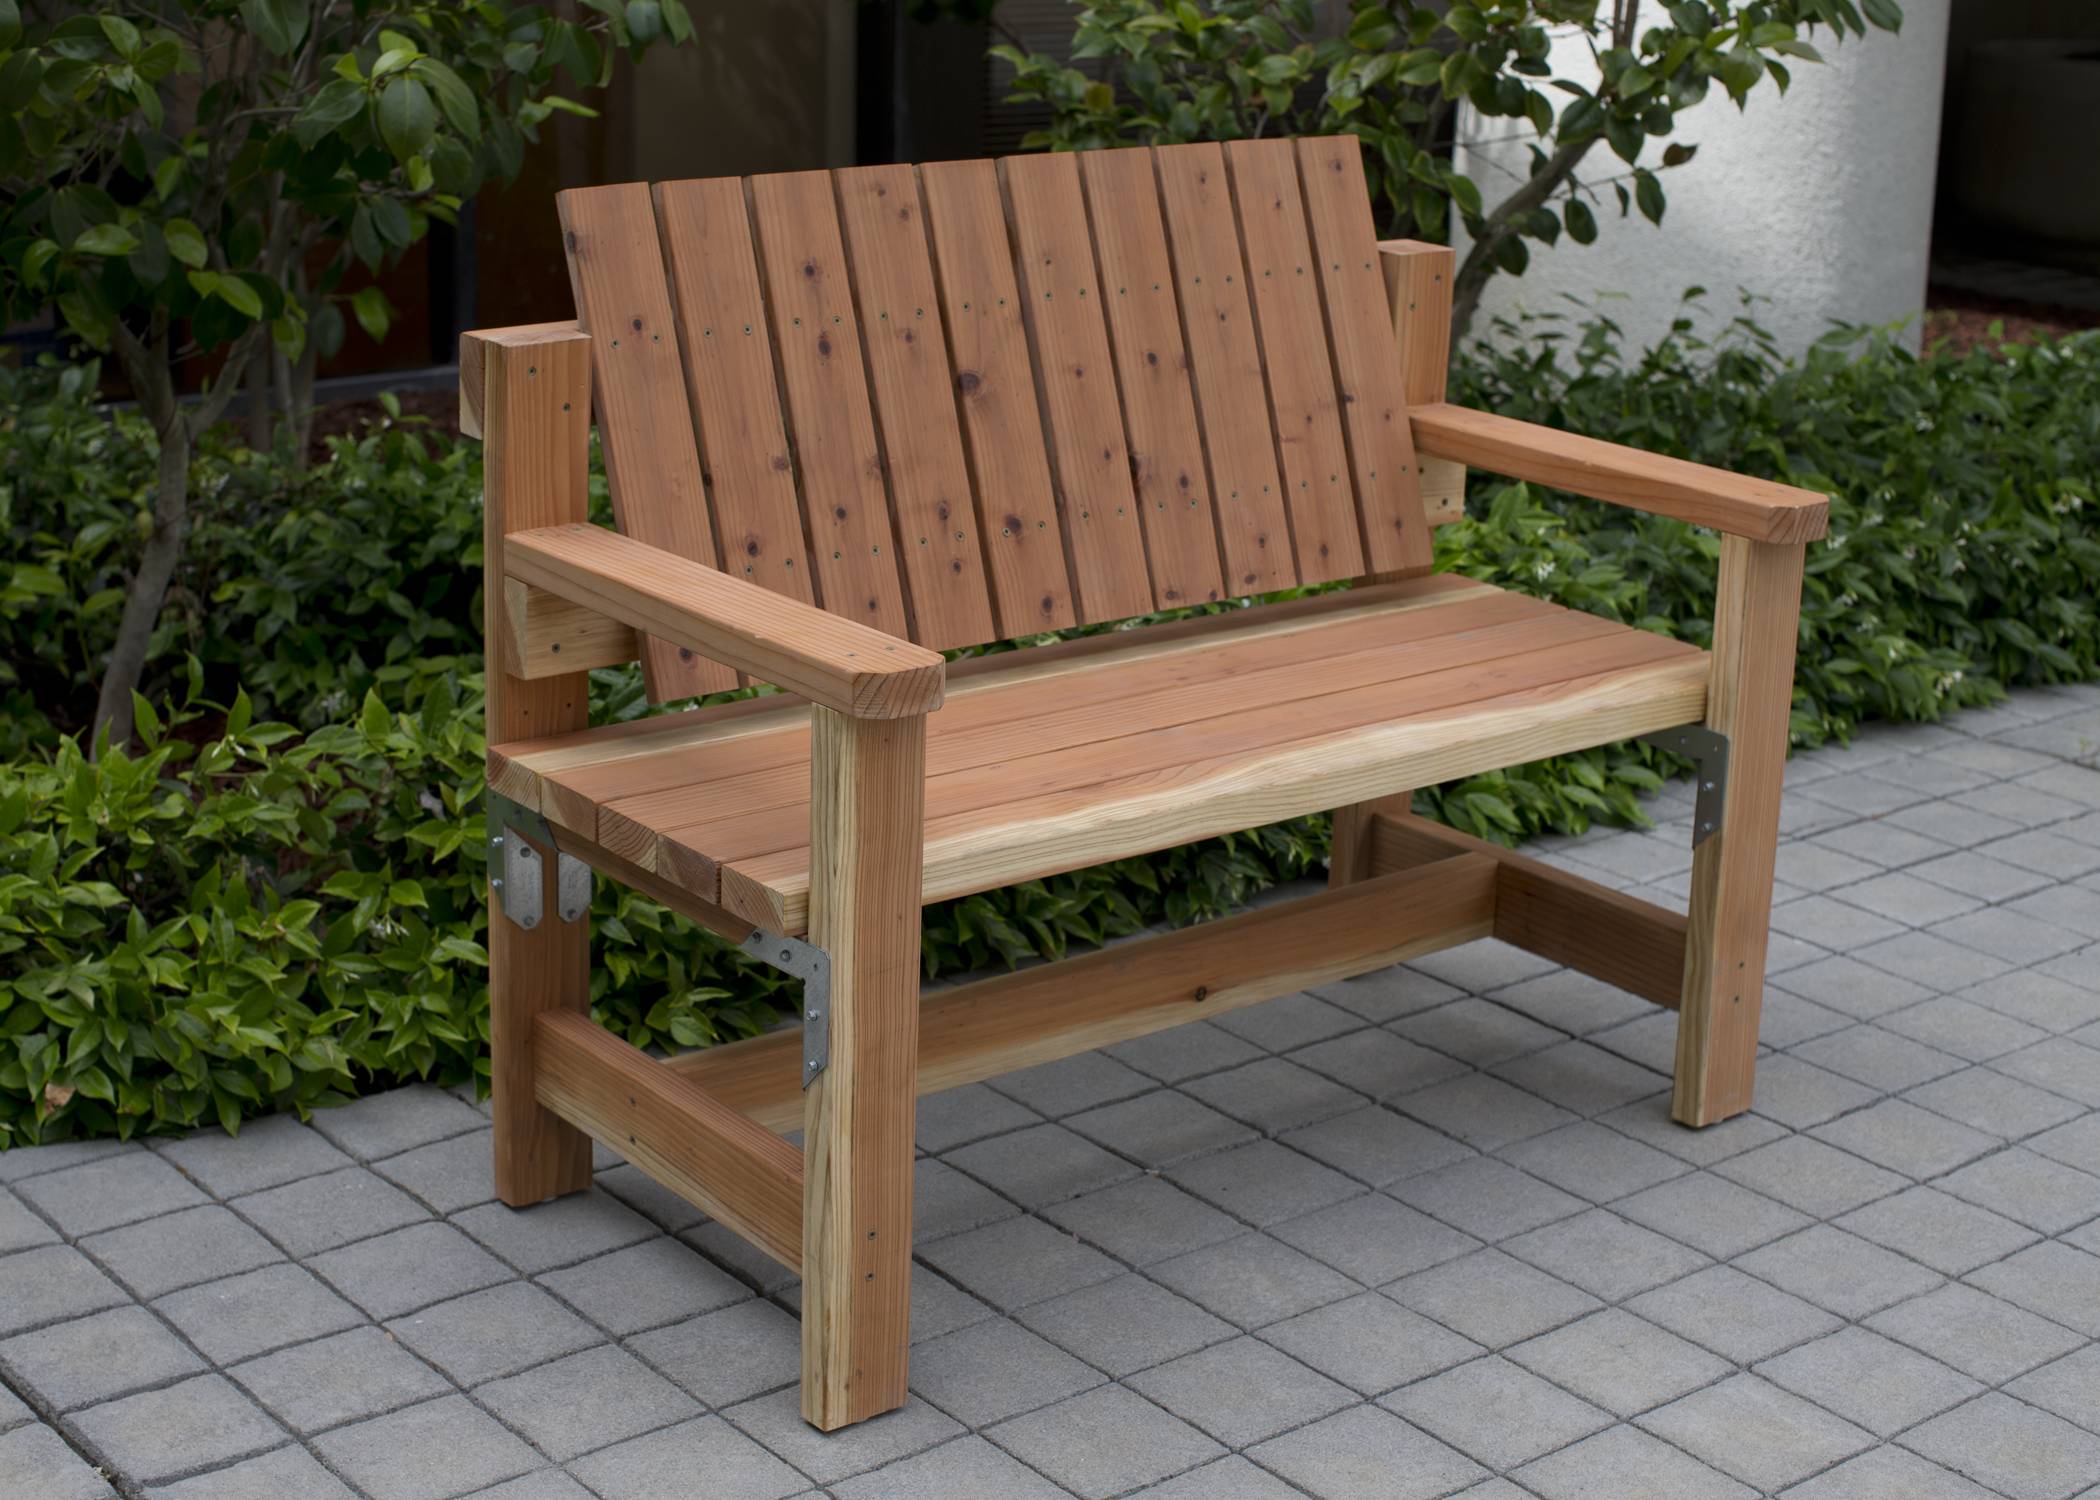 Popular Diy Garden Benches You Can Build It Yourself Do It